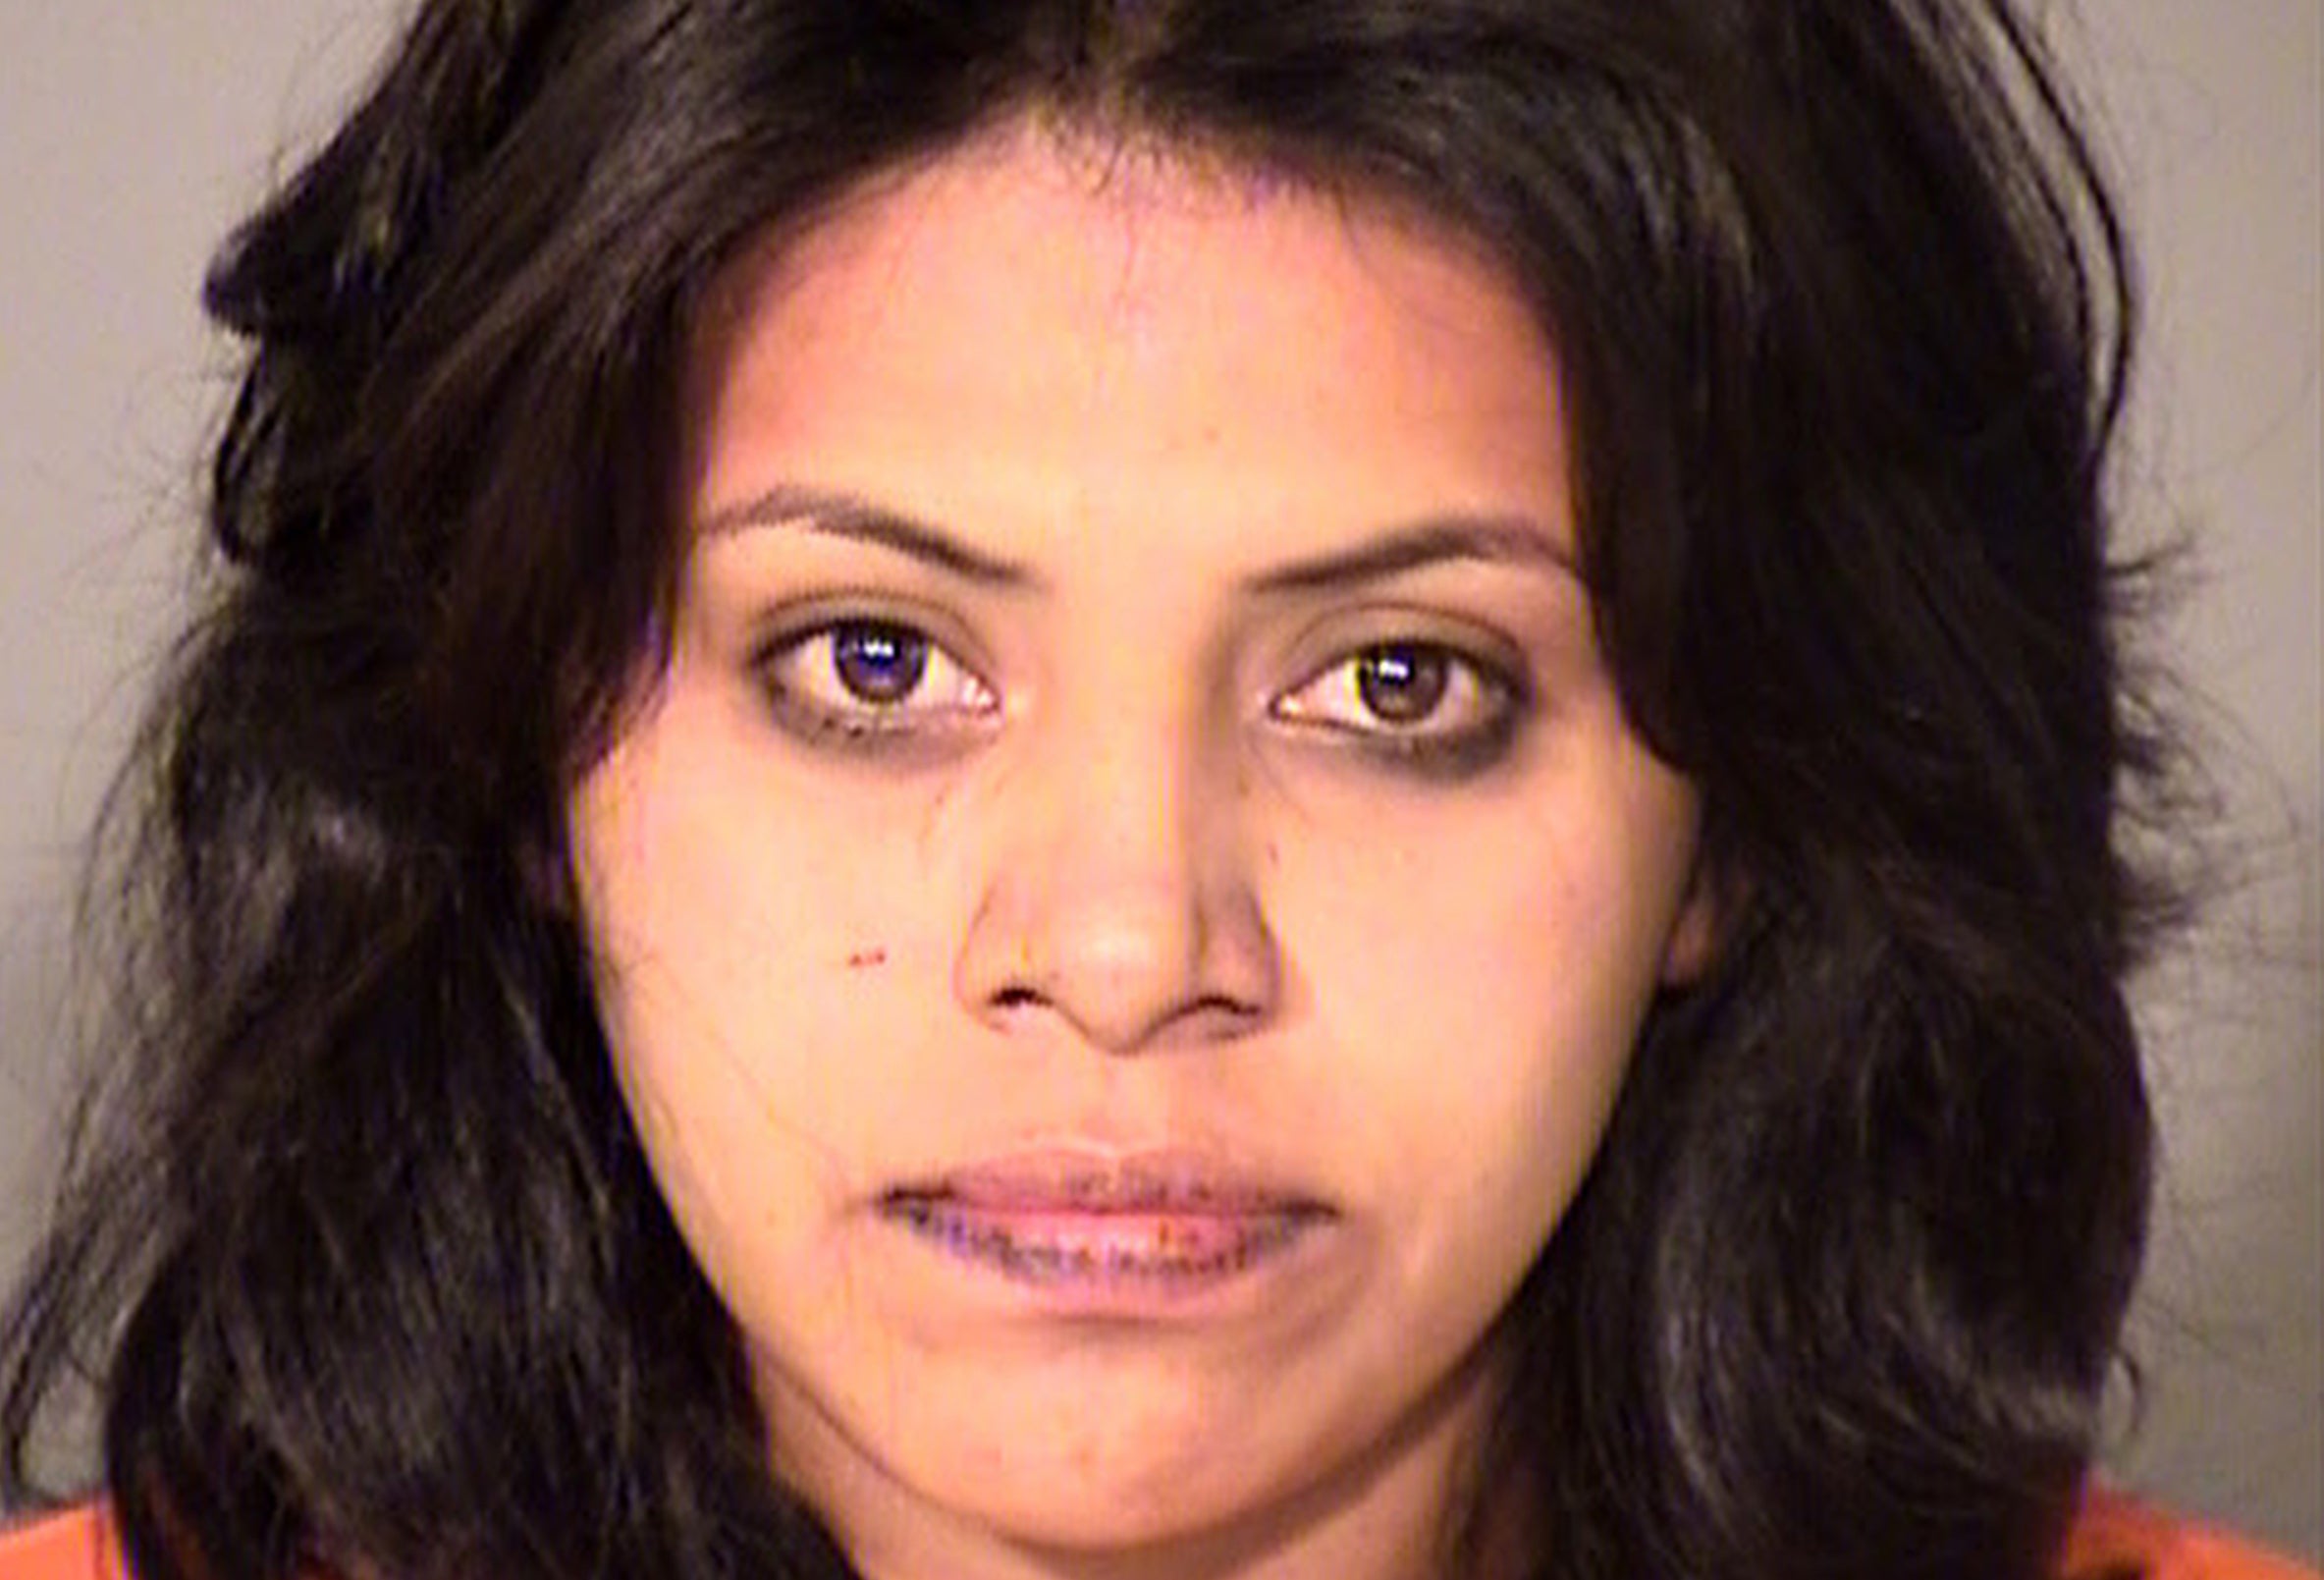 Genoveva Nunez-Figueroa, 28, was arrested after getting stuck inside a chimney trying to enter a home in California